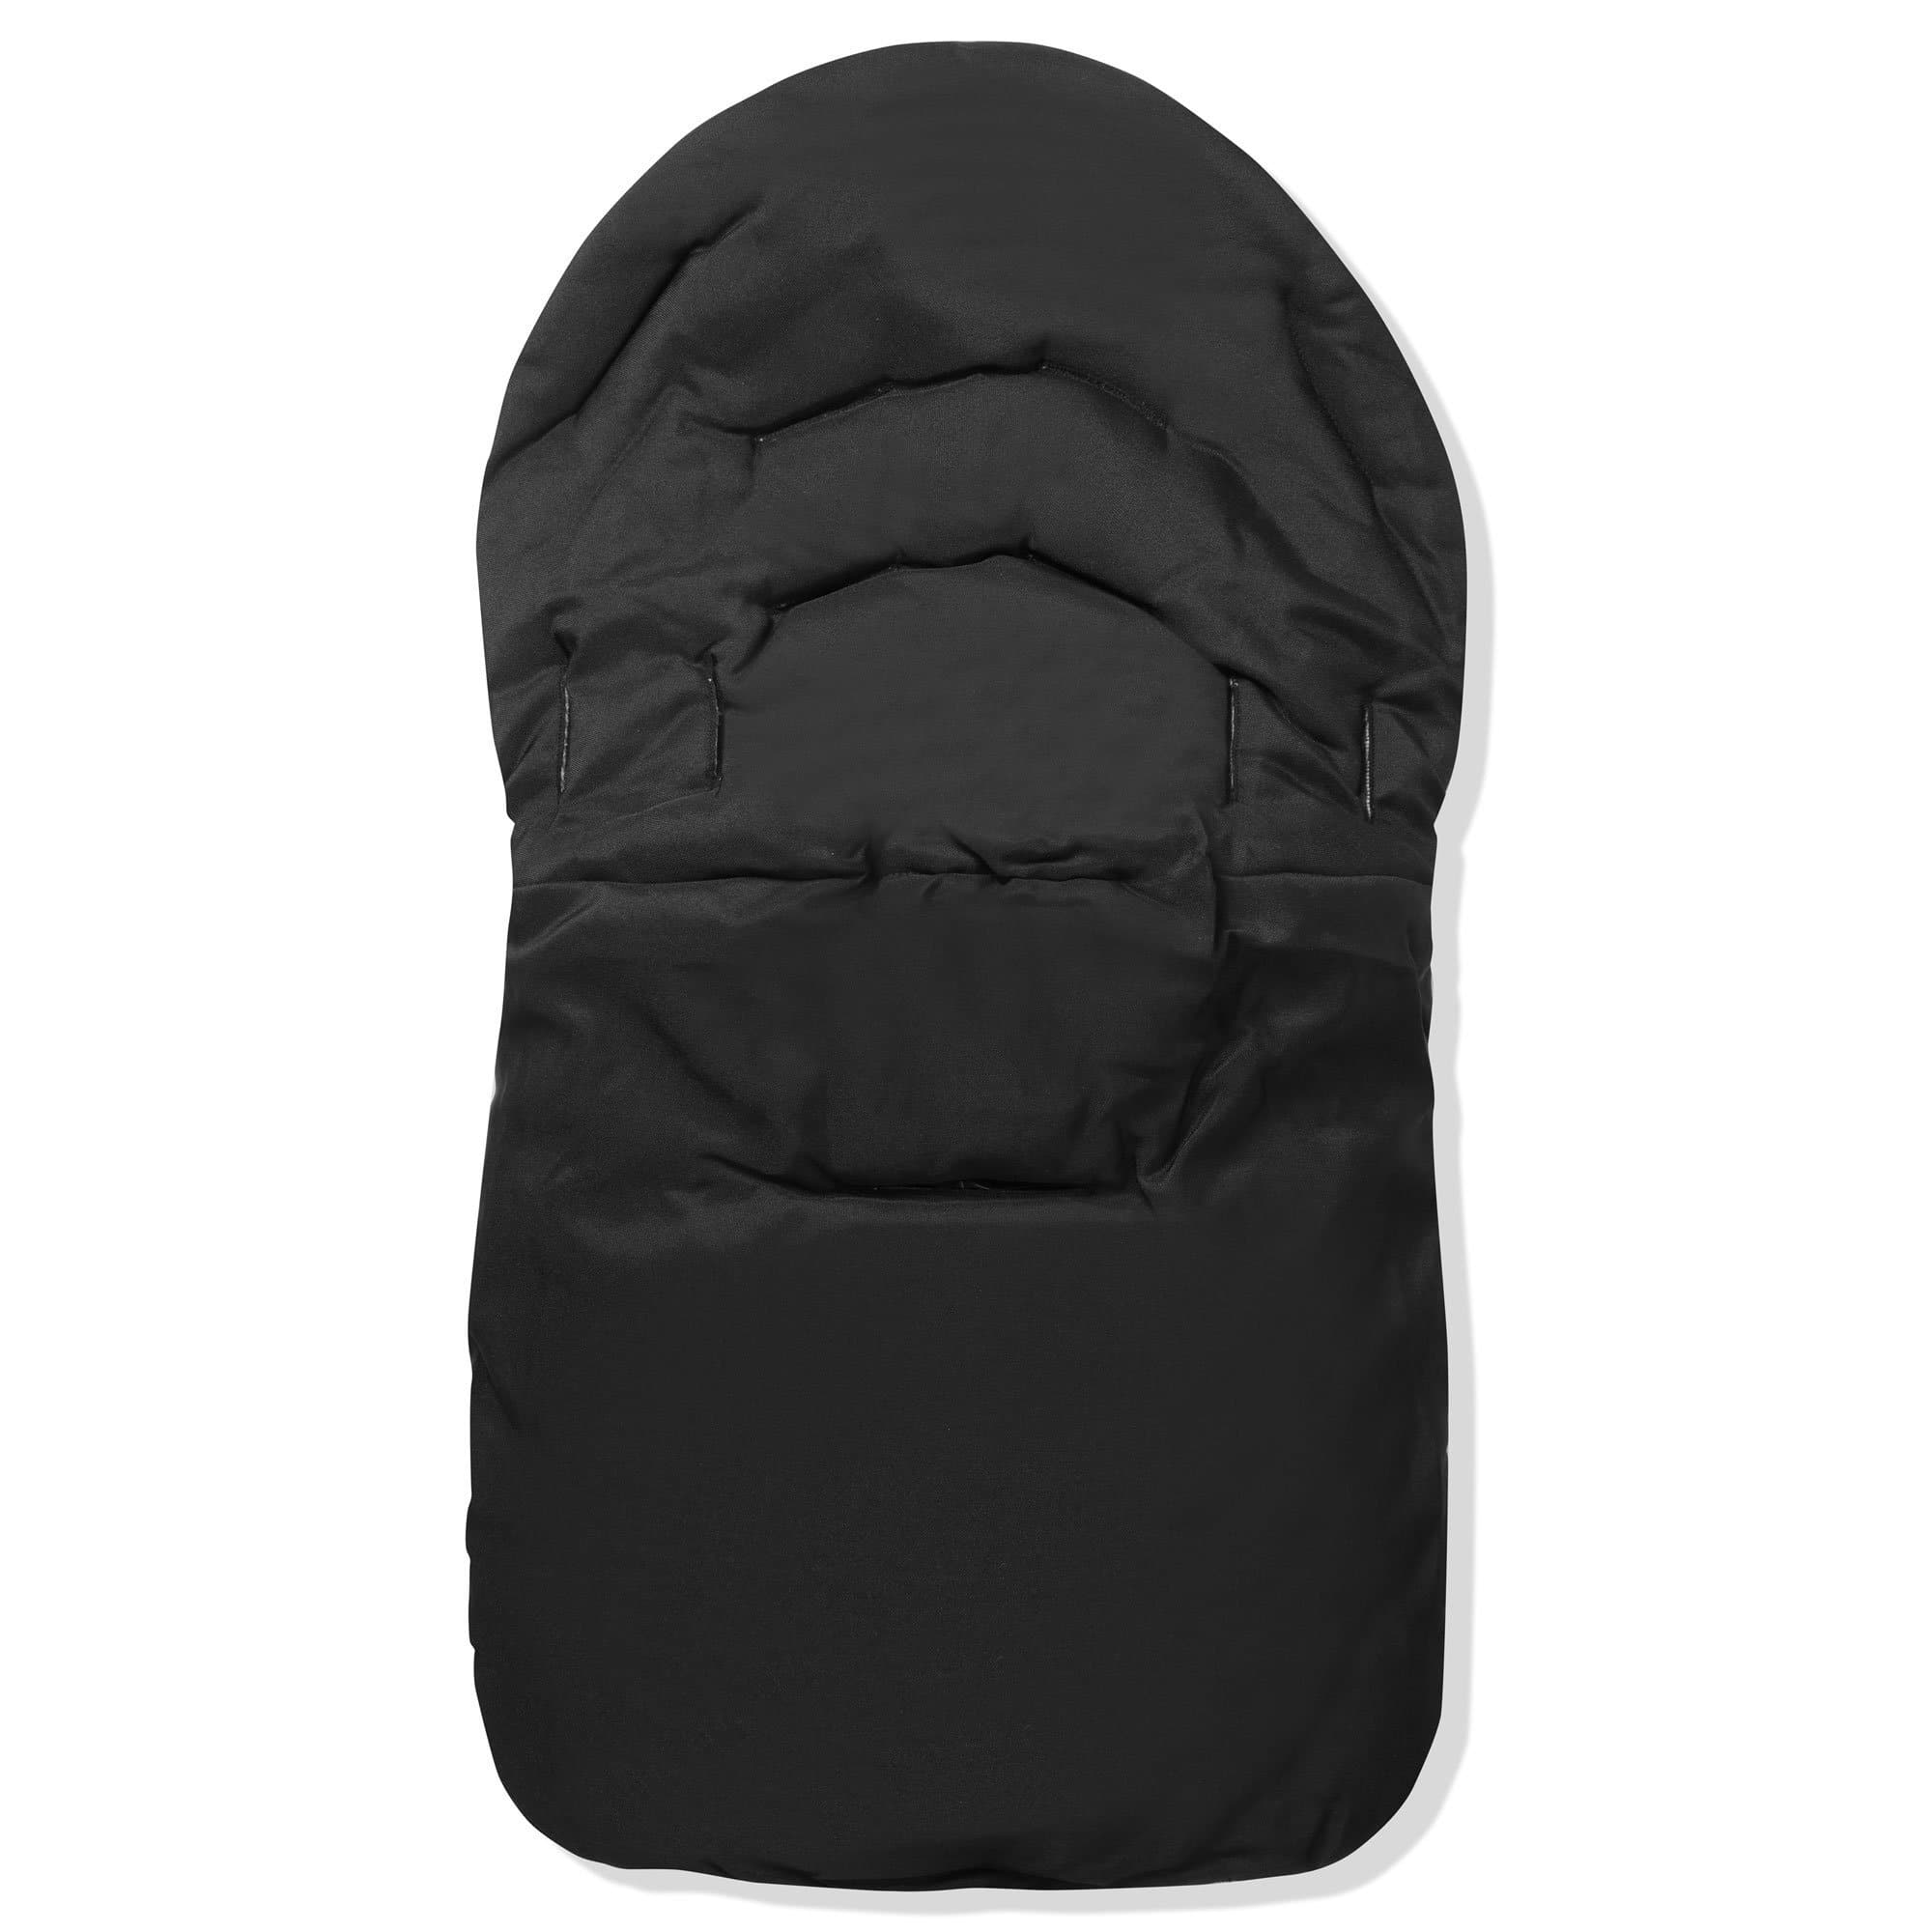 Car Seat Footmuff / Cosy Toes Compatible with Infababy -  | For Your Little One